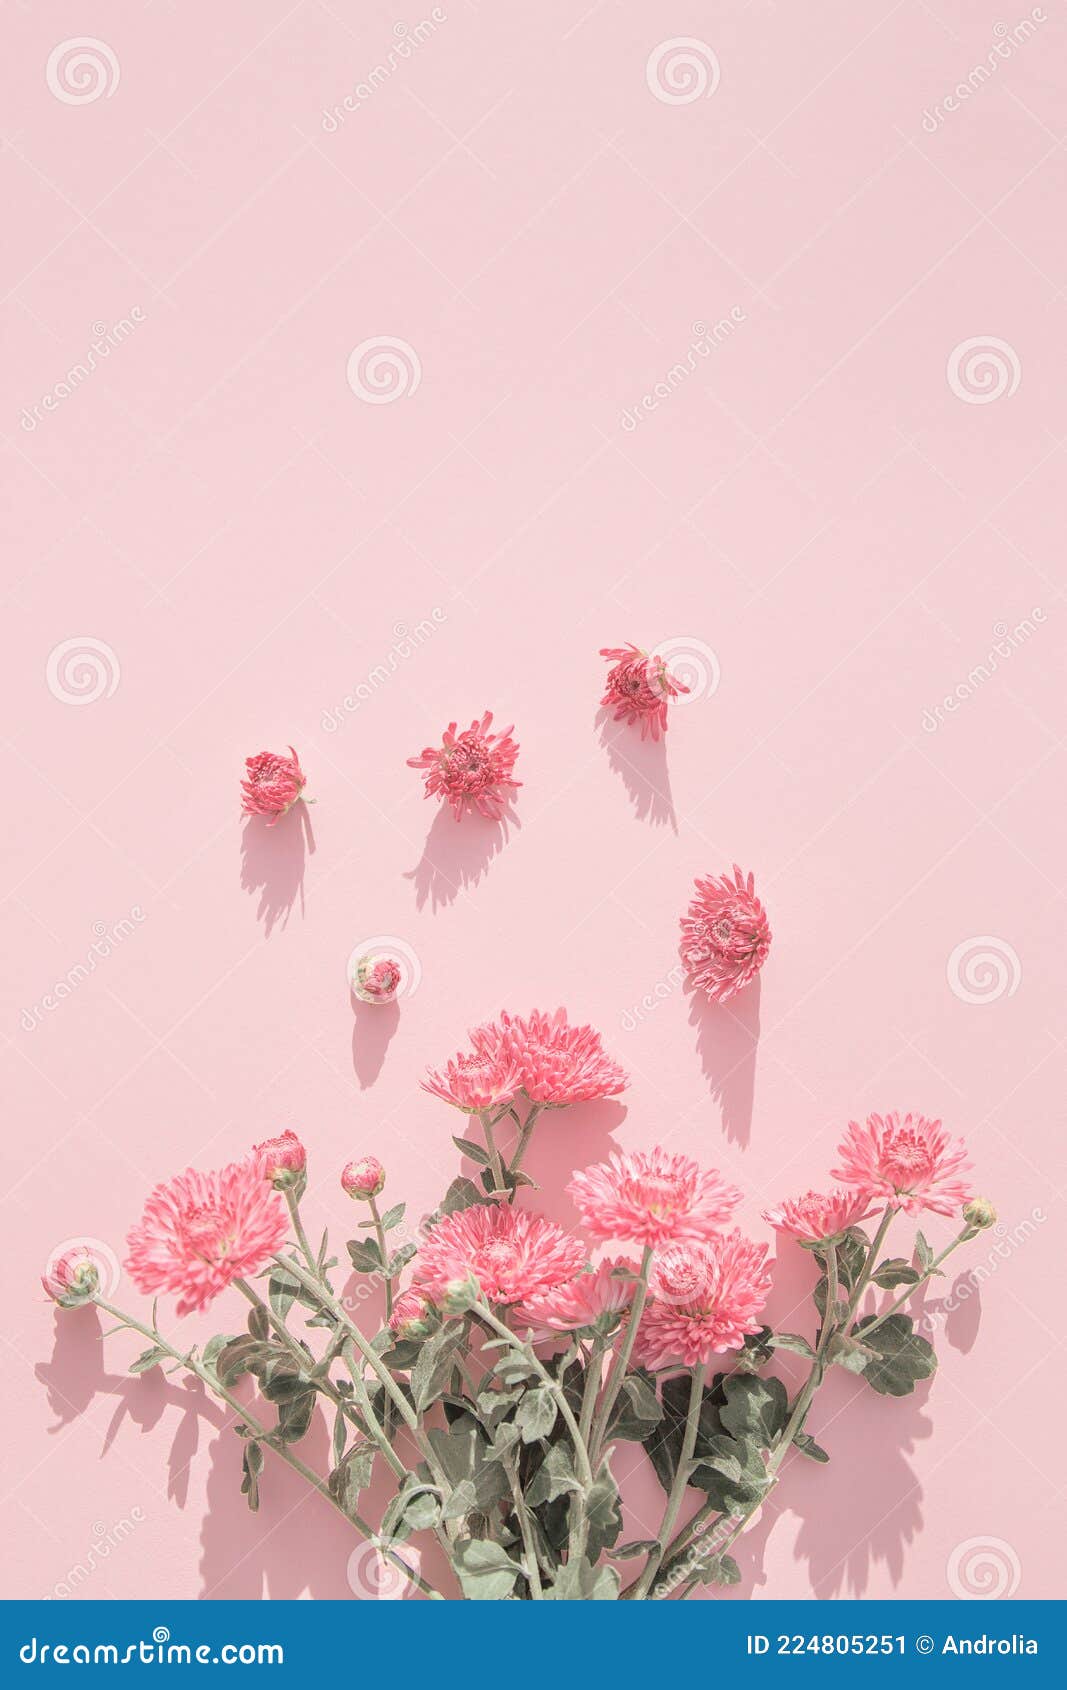 Page 6 - Free and customizable pink floral background templates